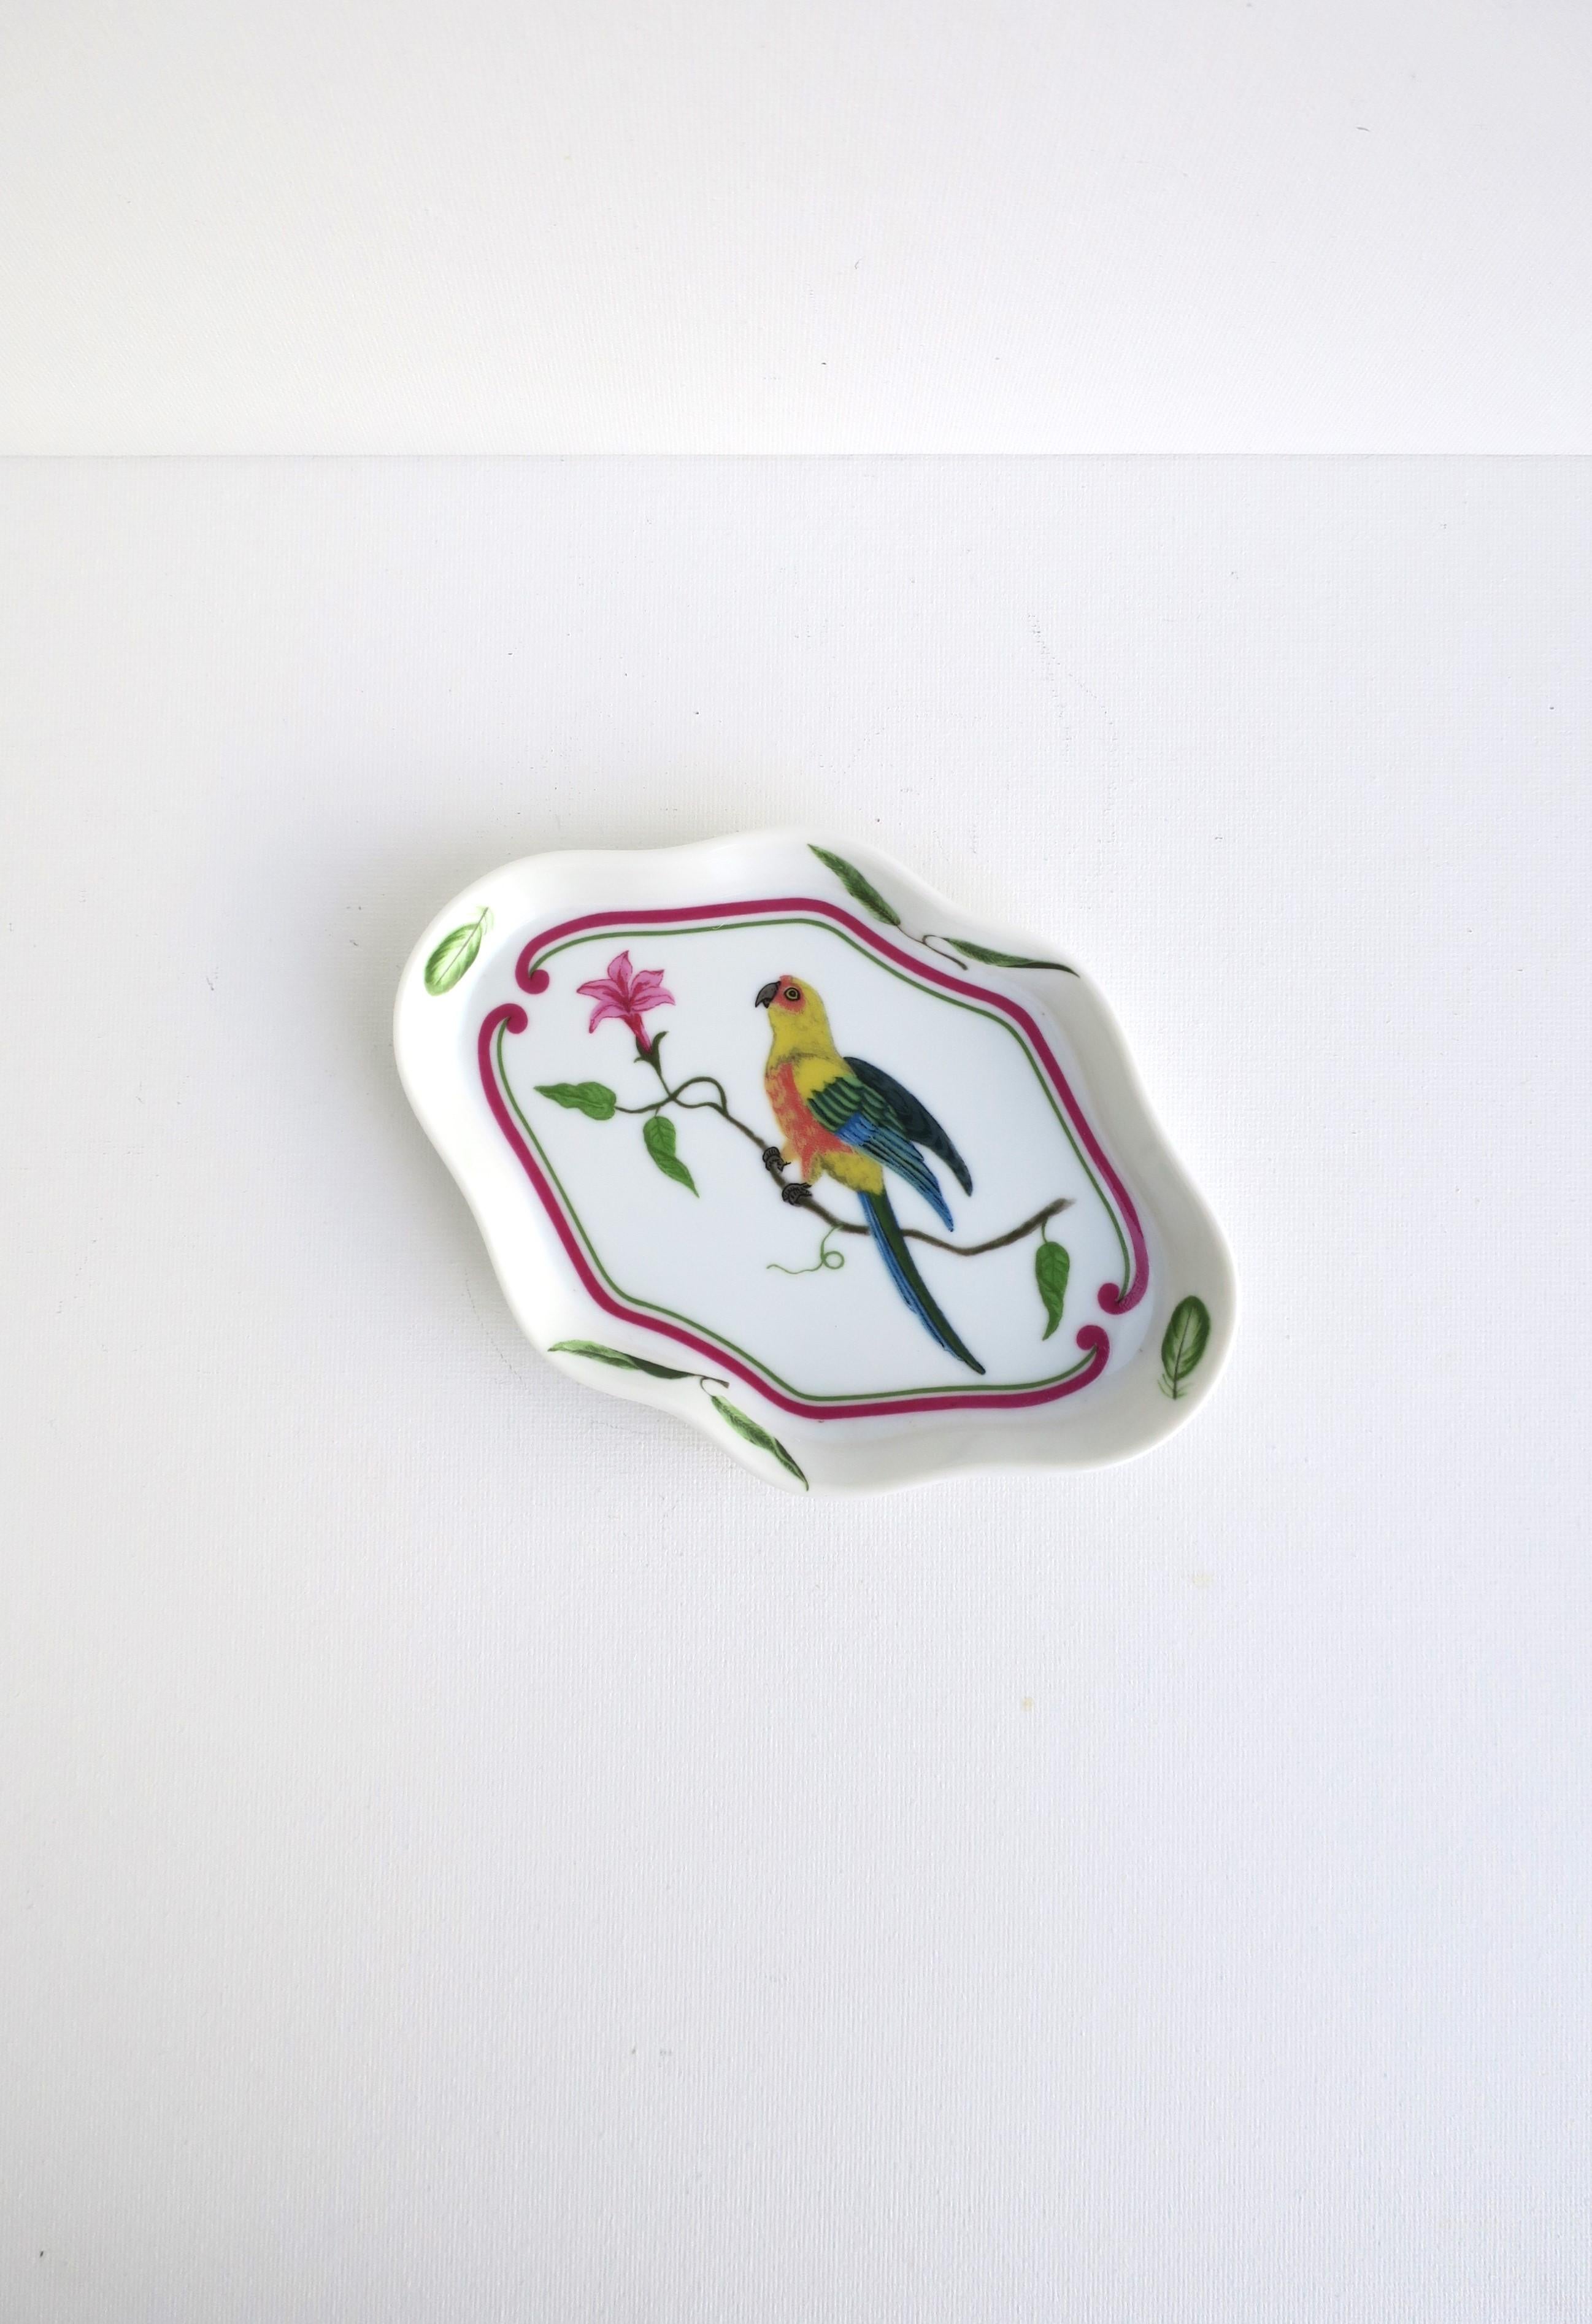 Glazed Porcelain Jewelry Dish with Parrot Bird Design, circa 1980s For Sale